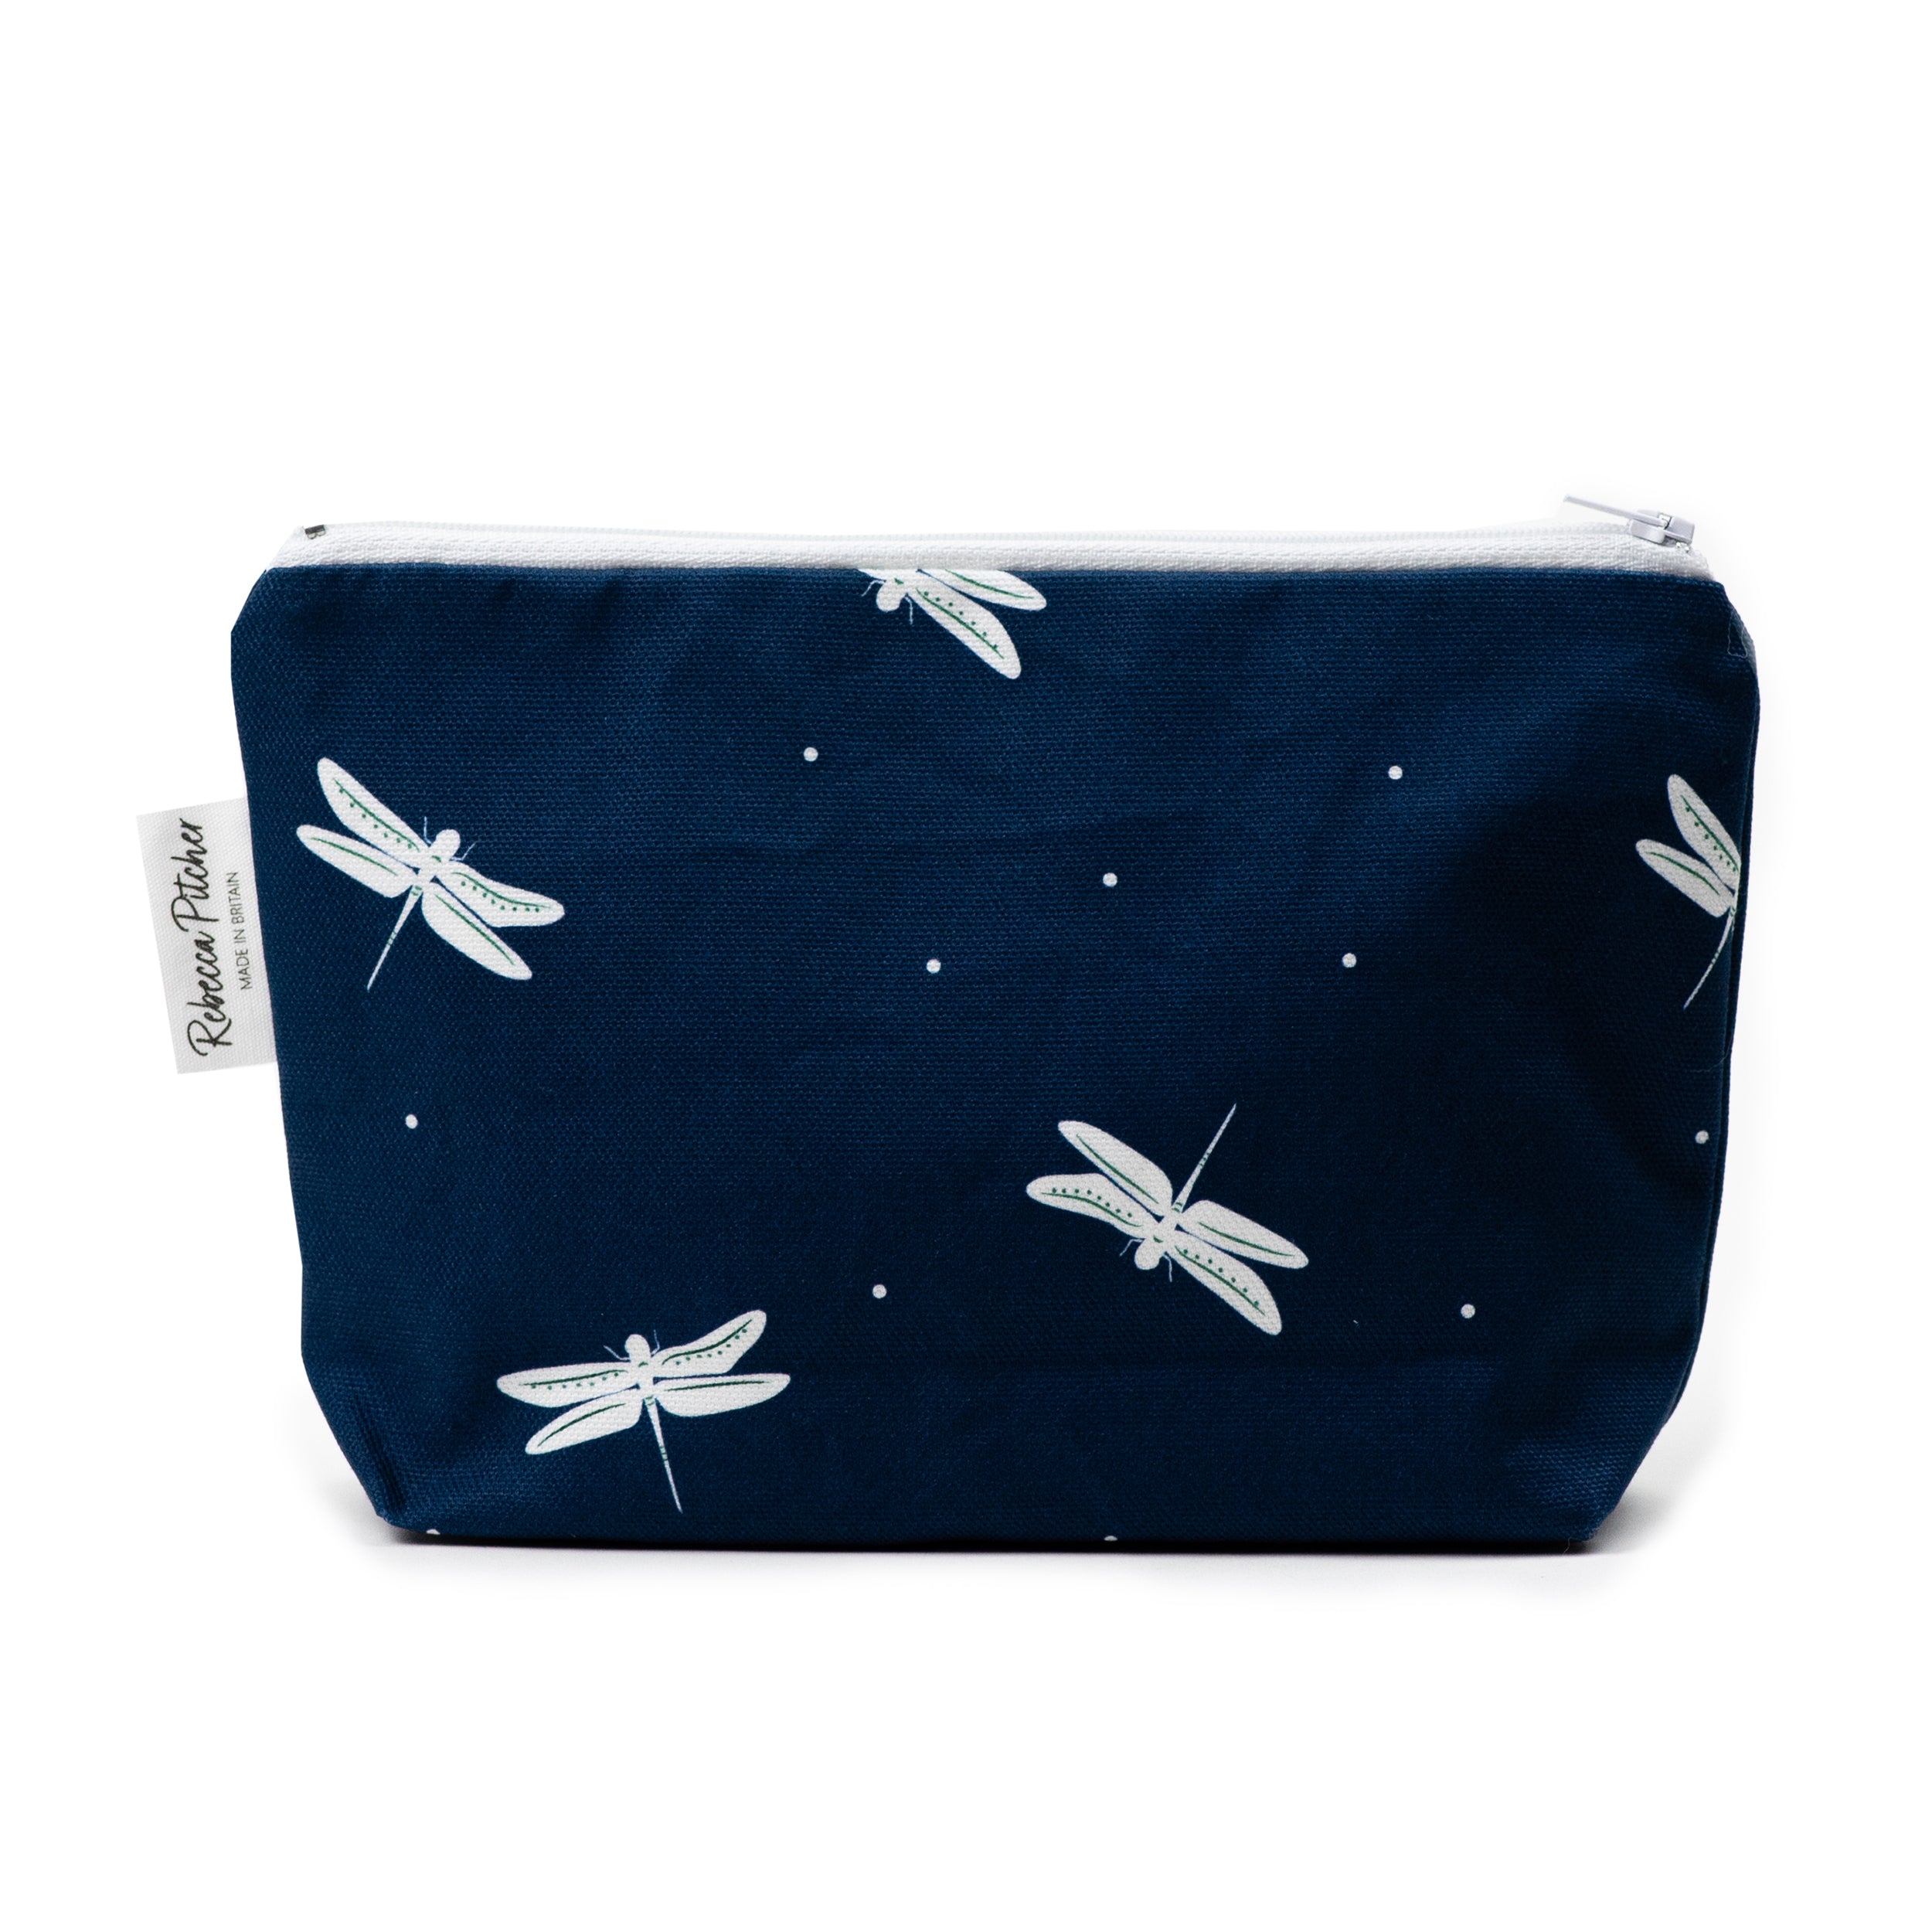 Dragonfly Makeup Bag by Rebecca Pitcher